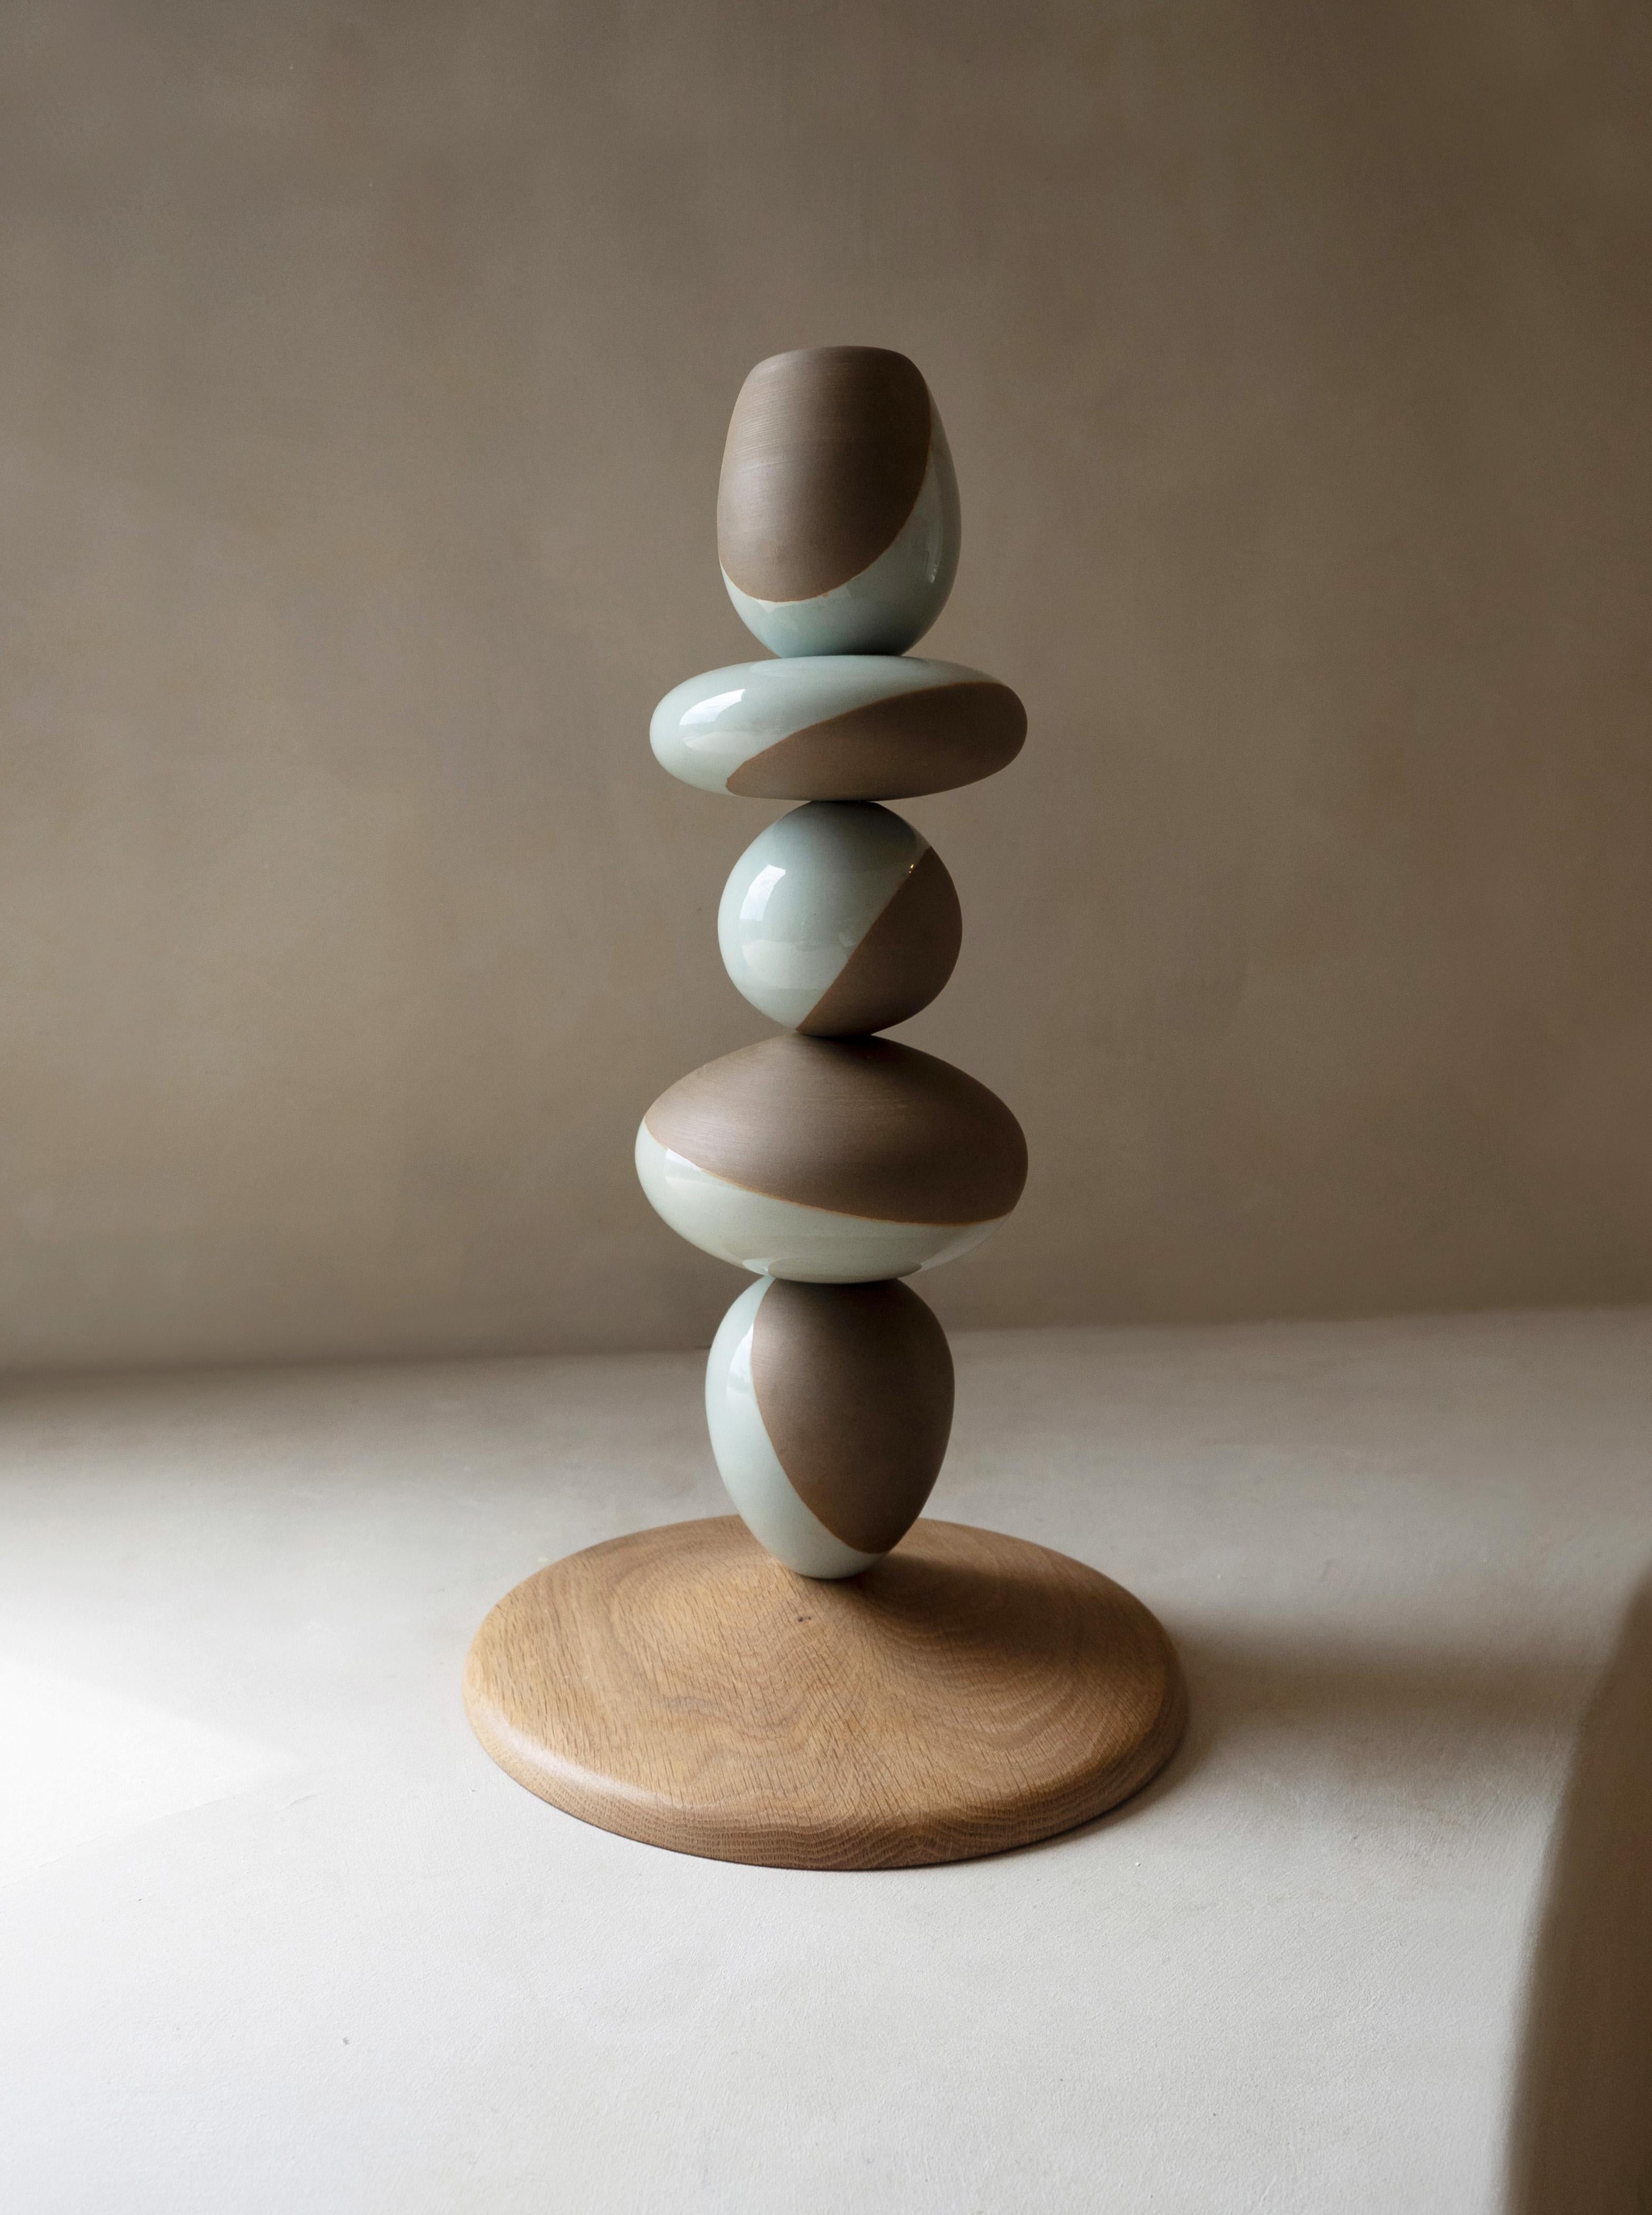 Stack Vessel II by Soo Joo is a stack sculpture made in Korean Ceramic. It is a timeless form, reminiscent of a stack of perfectly balanced river stones. This is the shorter of the two Stack Vessel pairs. The Stack Vessel series is created with